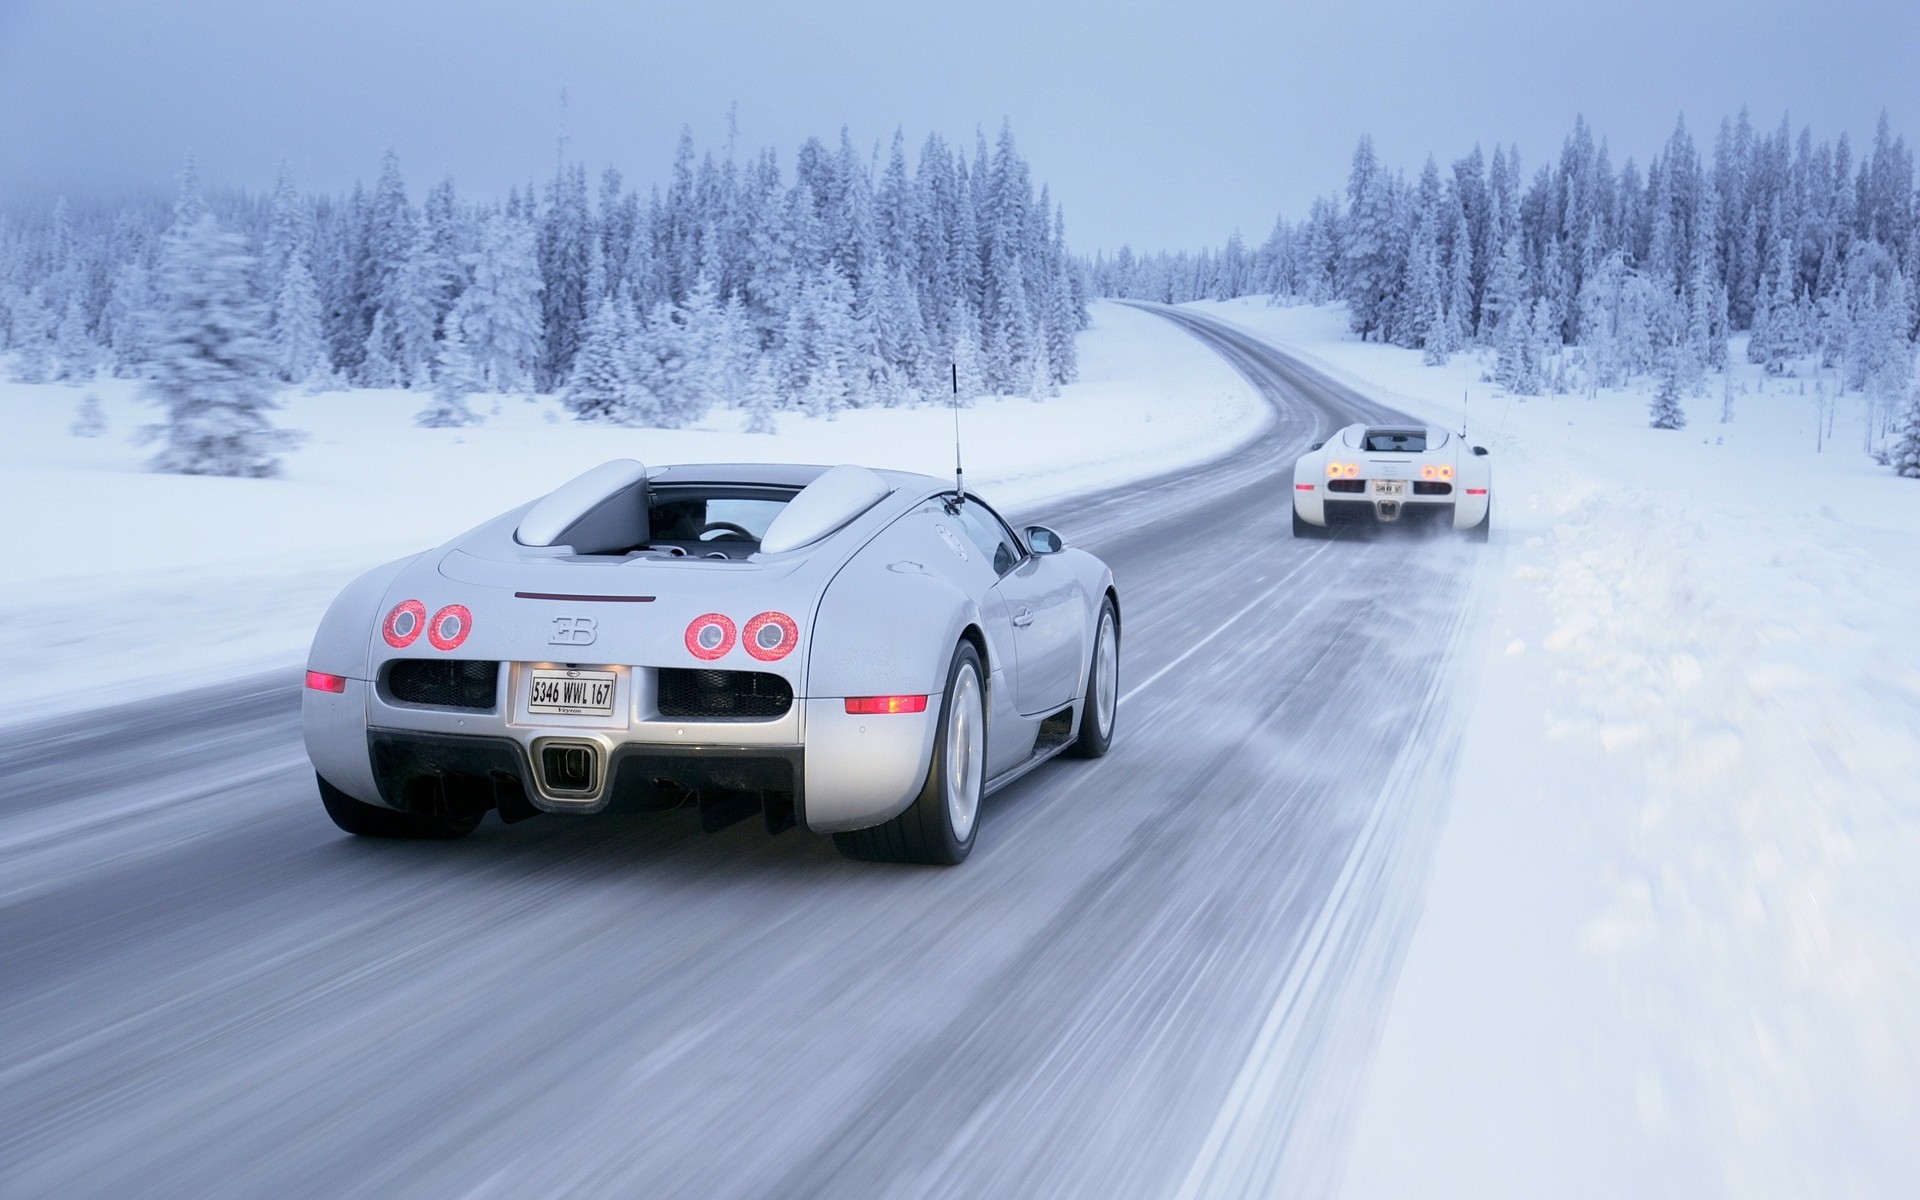 1920x1200 Bugatti Veyron vehicles cars exotic supercar landscapes nature winter snow  blizzard trees forests roads track wallpaper |  | 25707 |  WallpaperUP